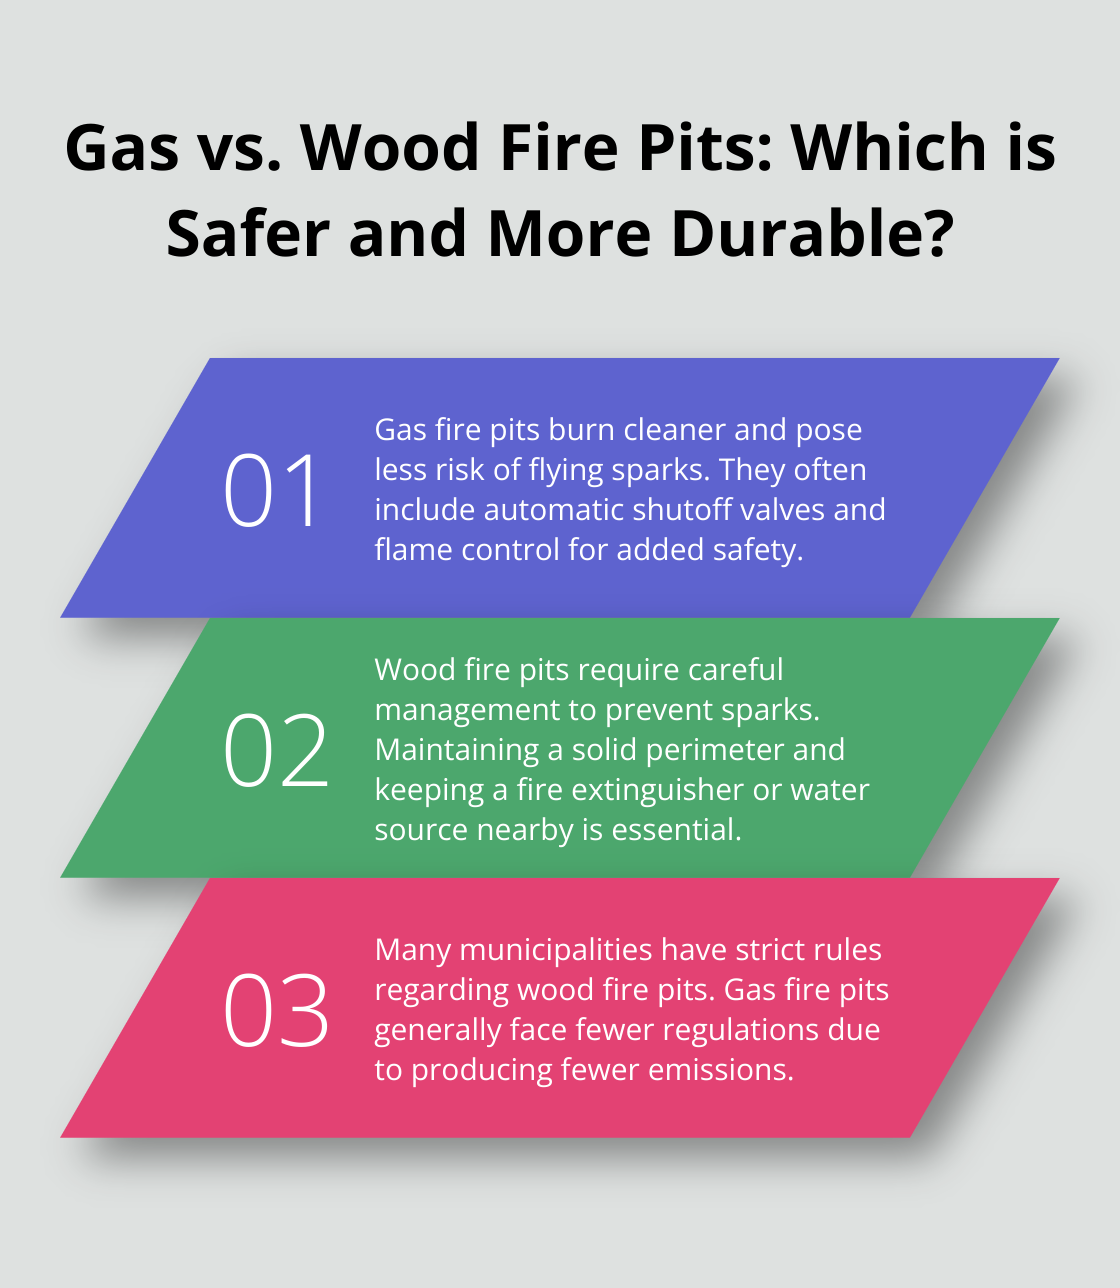 Fact - Gas vs. Wood Fire Pits: Which is Safer and More Durable?